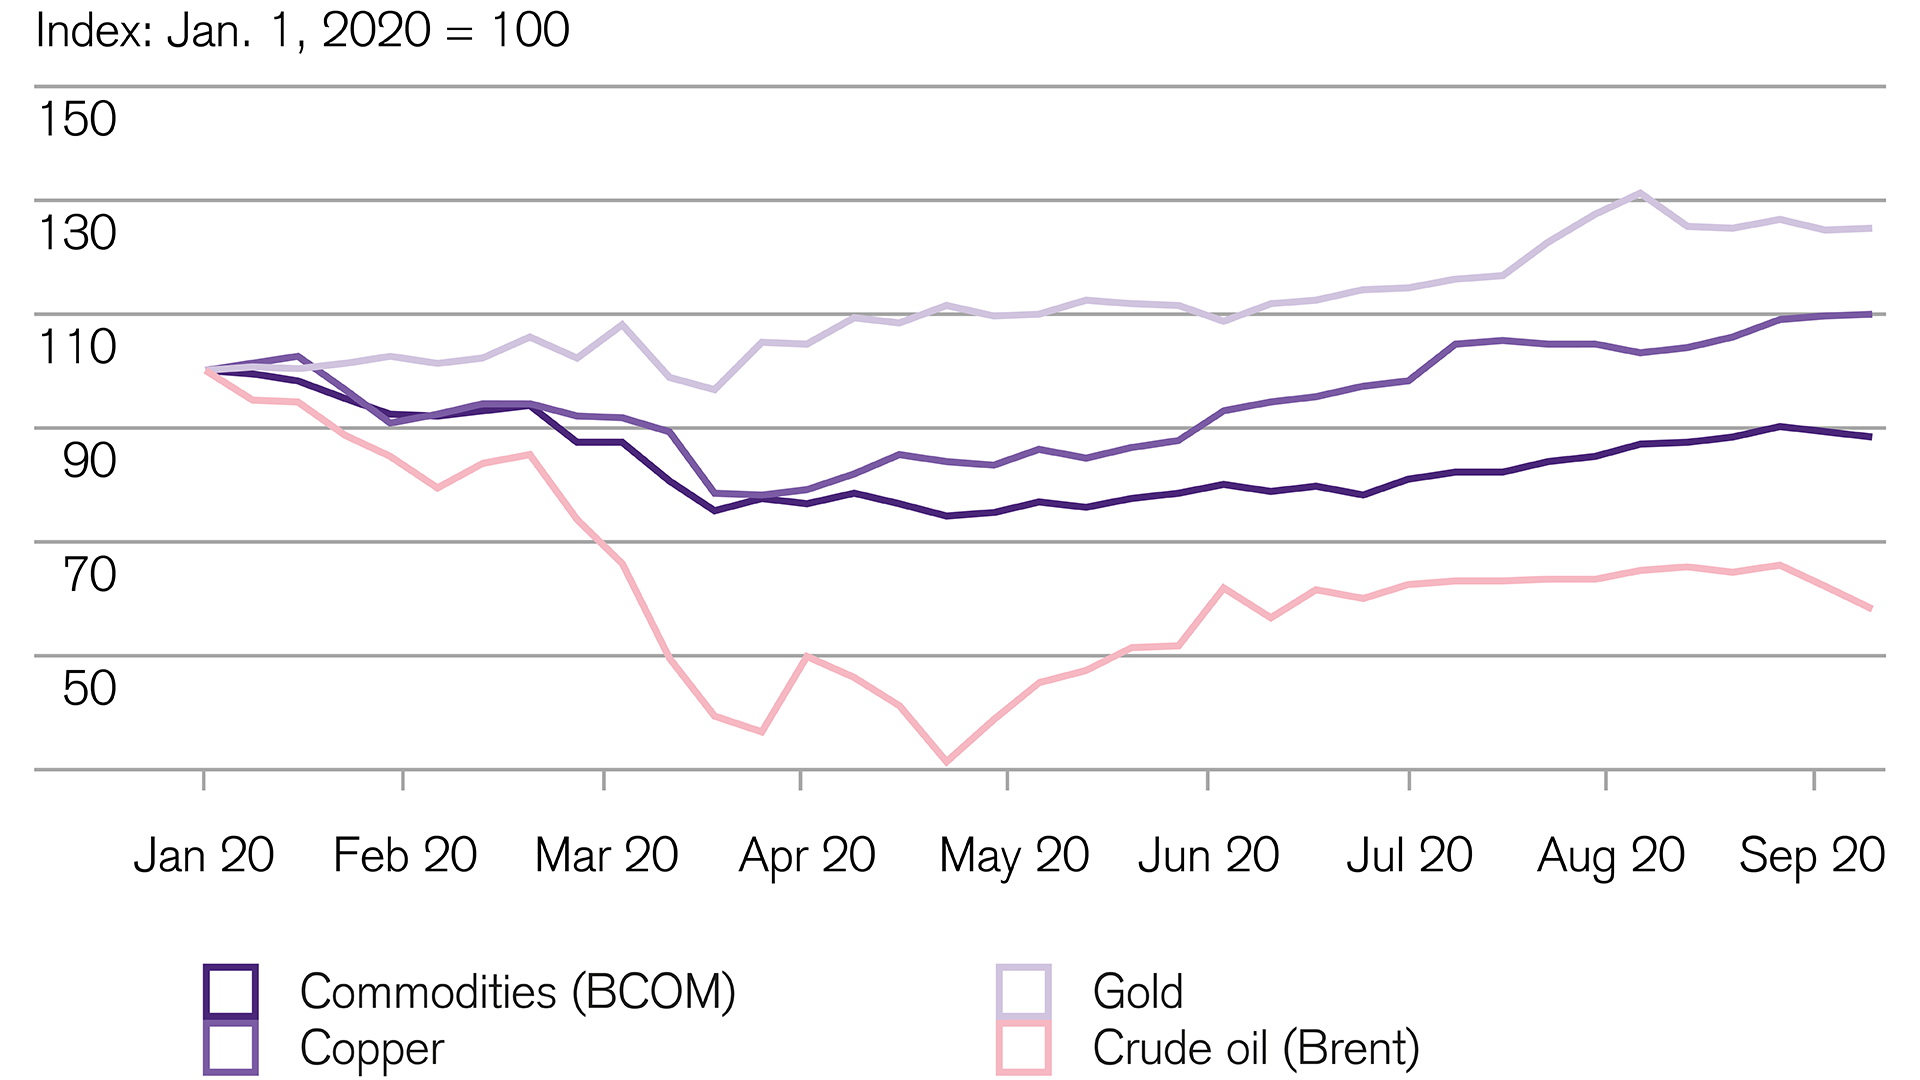 Investing: Performance of commodities is a mixed bag